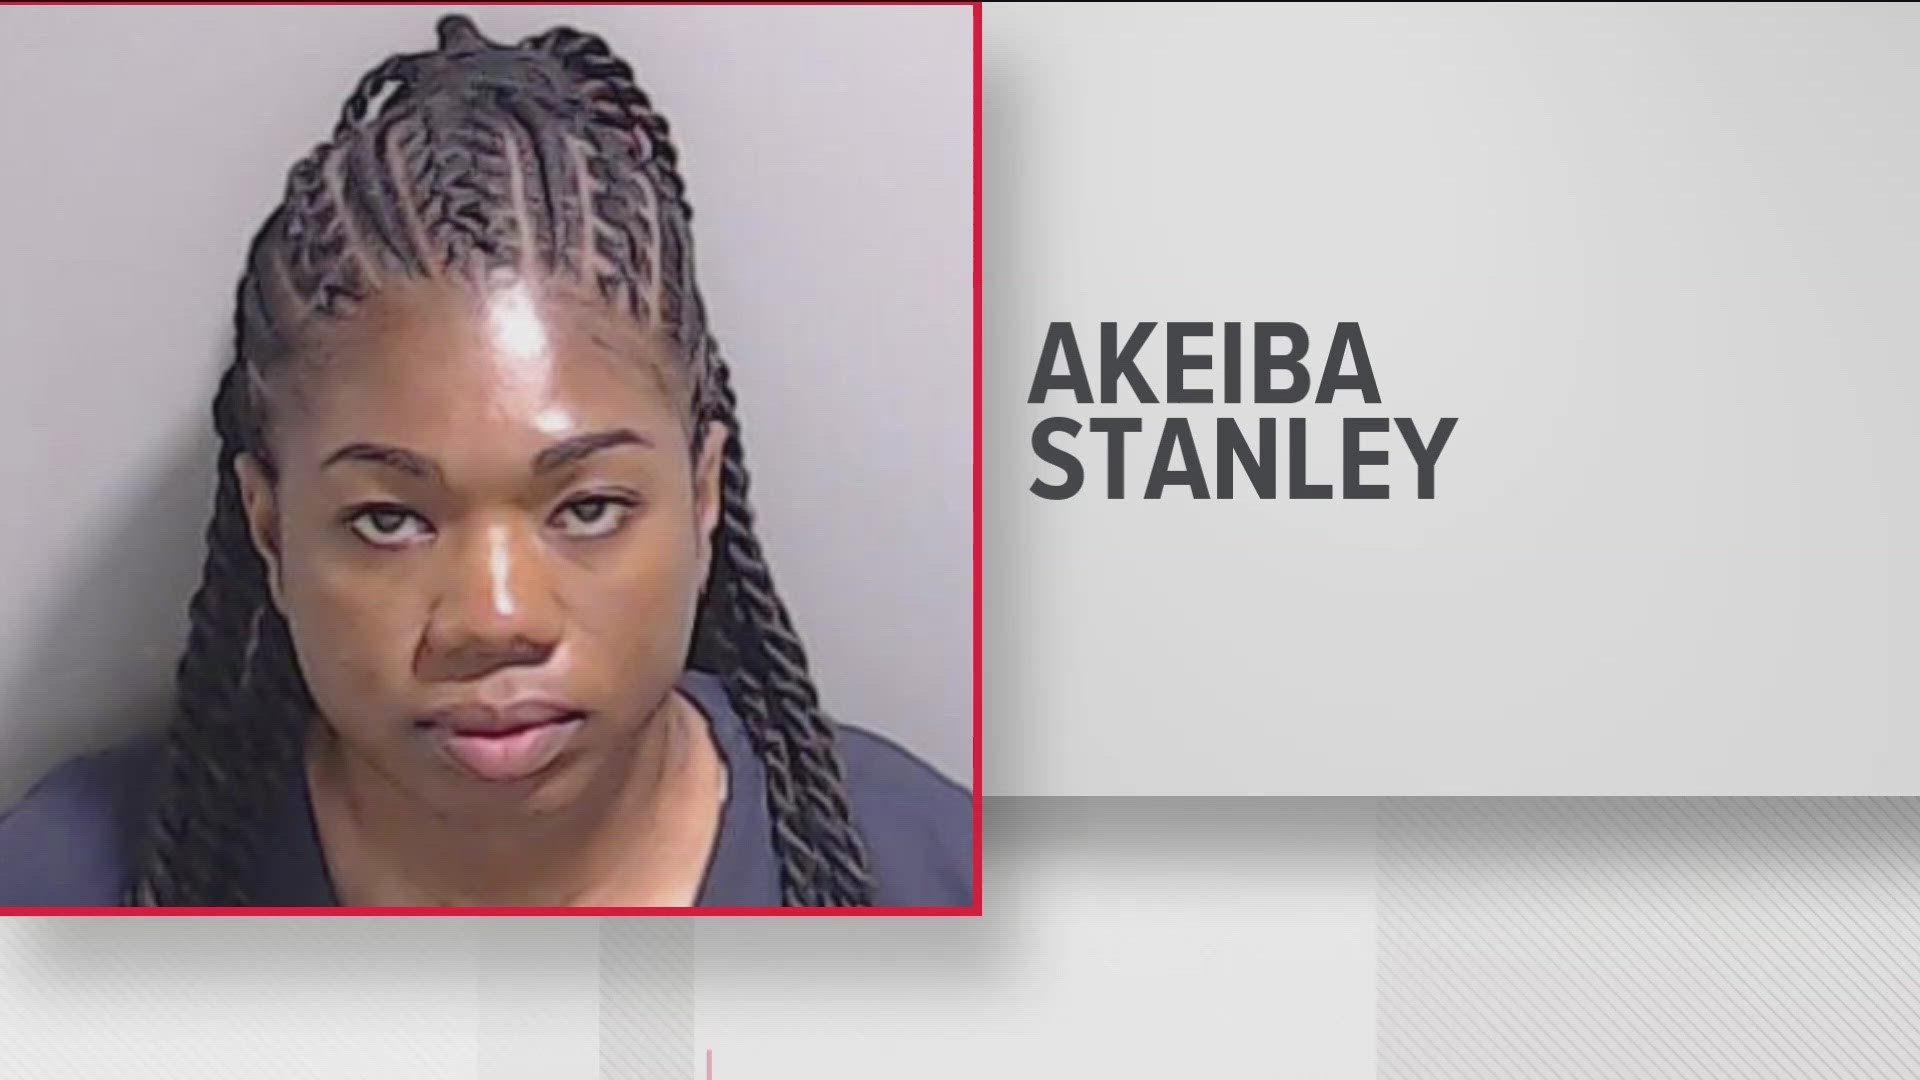 Akeiba Stanley is accused of trying to bring in contraband to Christian Eppinger, an alleged YSL gang member.